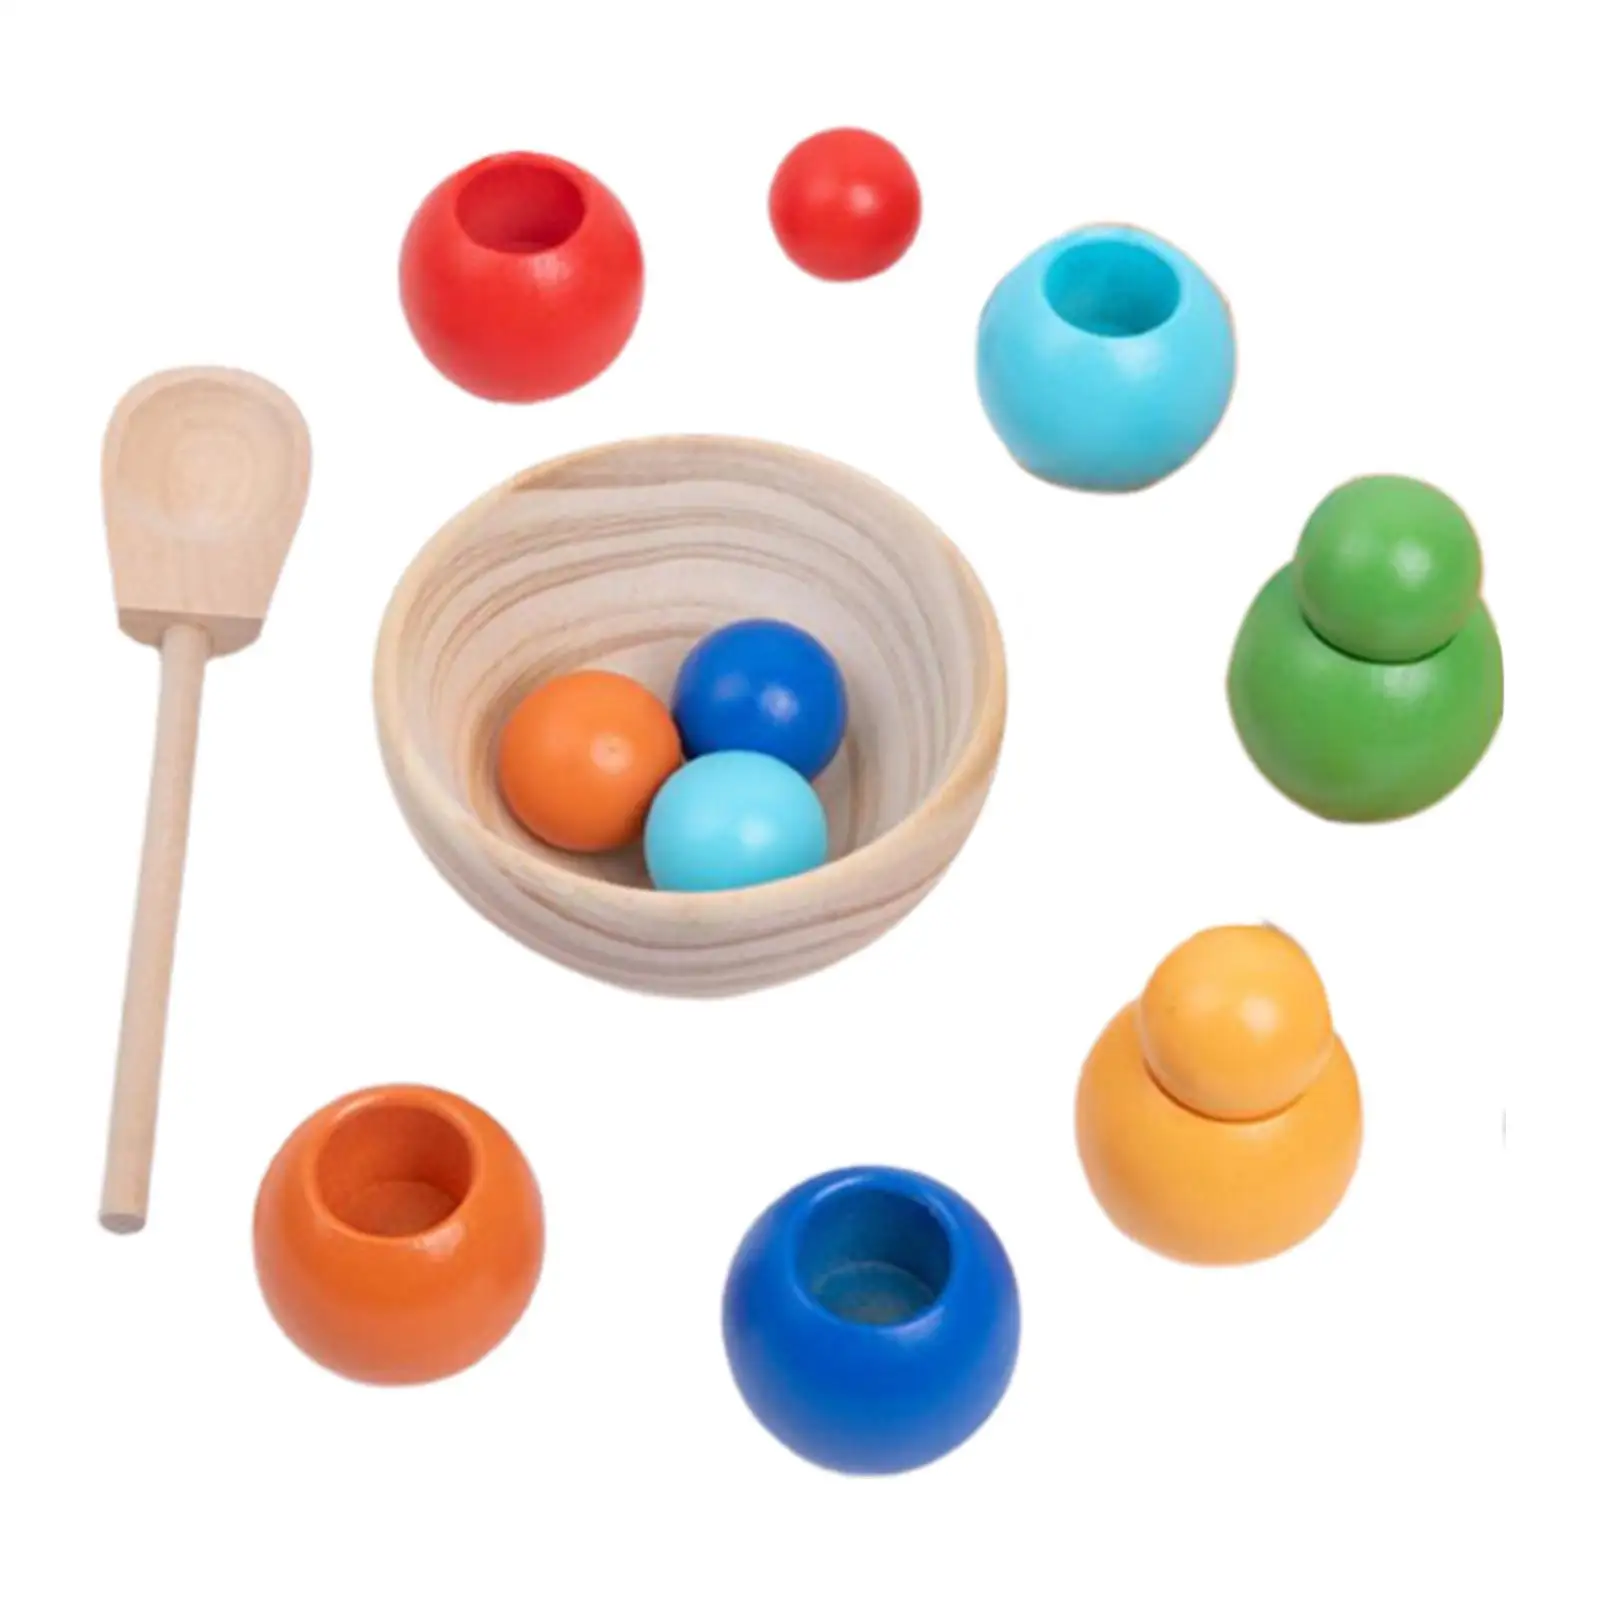 Balls in Cups Montessori Toy Board Game Preschool Learning Toy for Toddlers Baby Early Education Toys Matching and Counting Toy